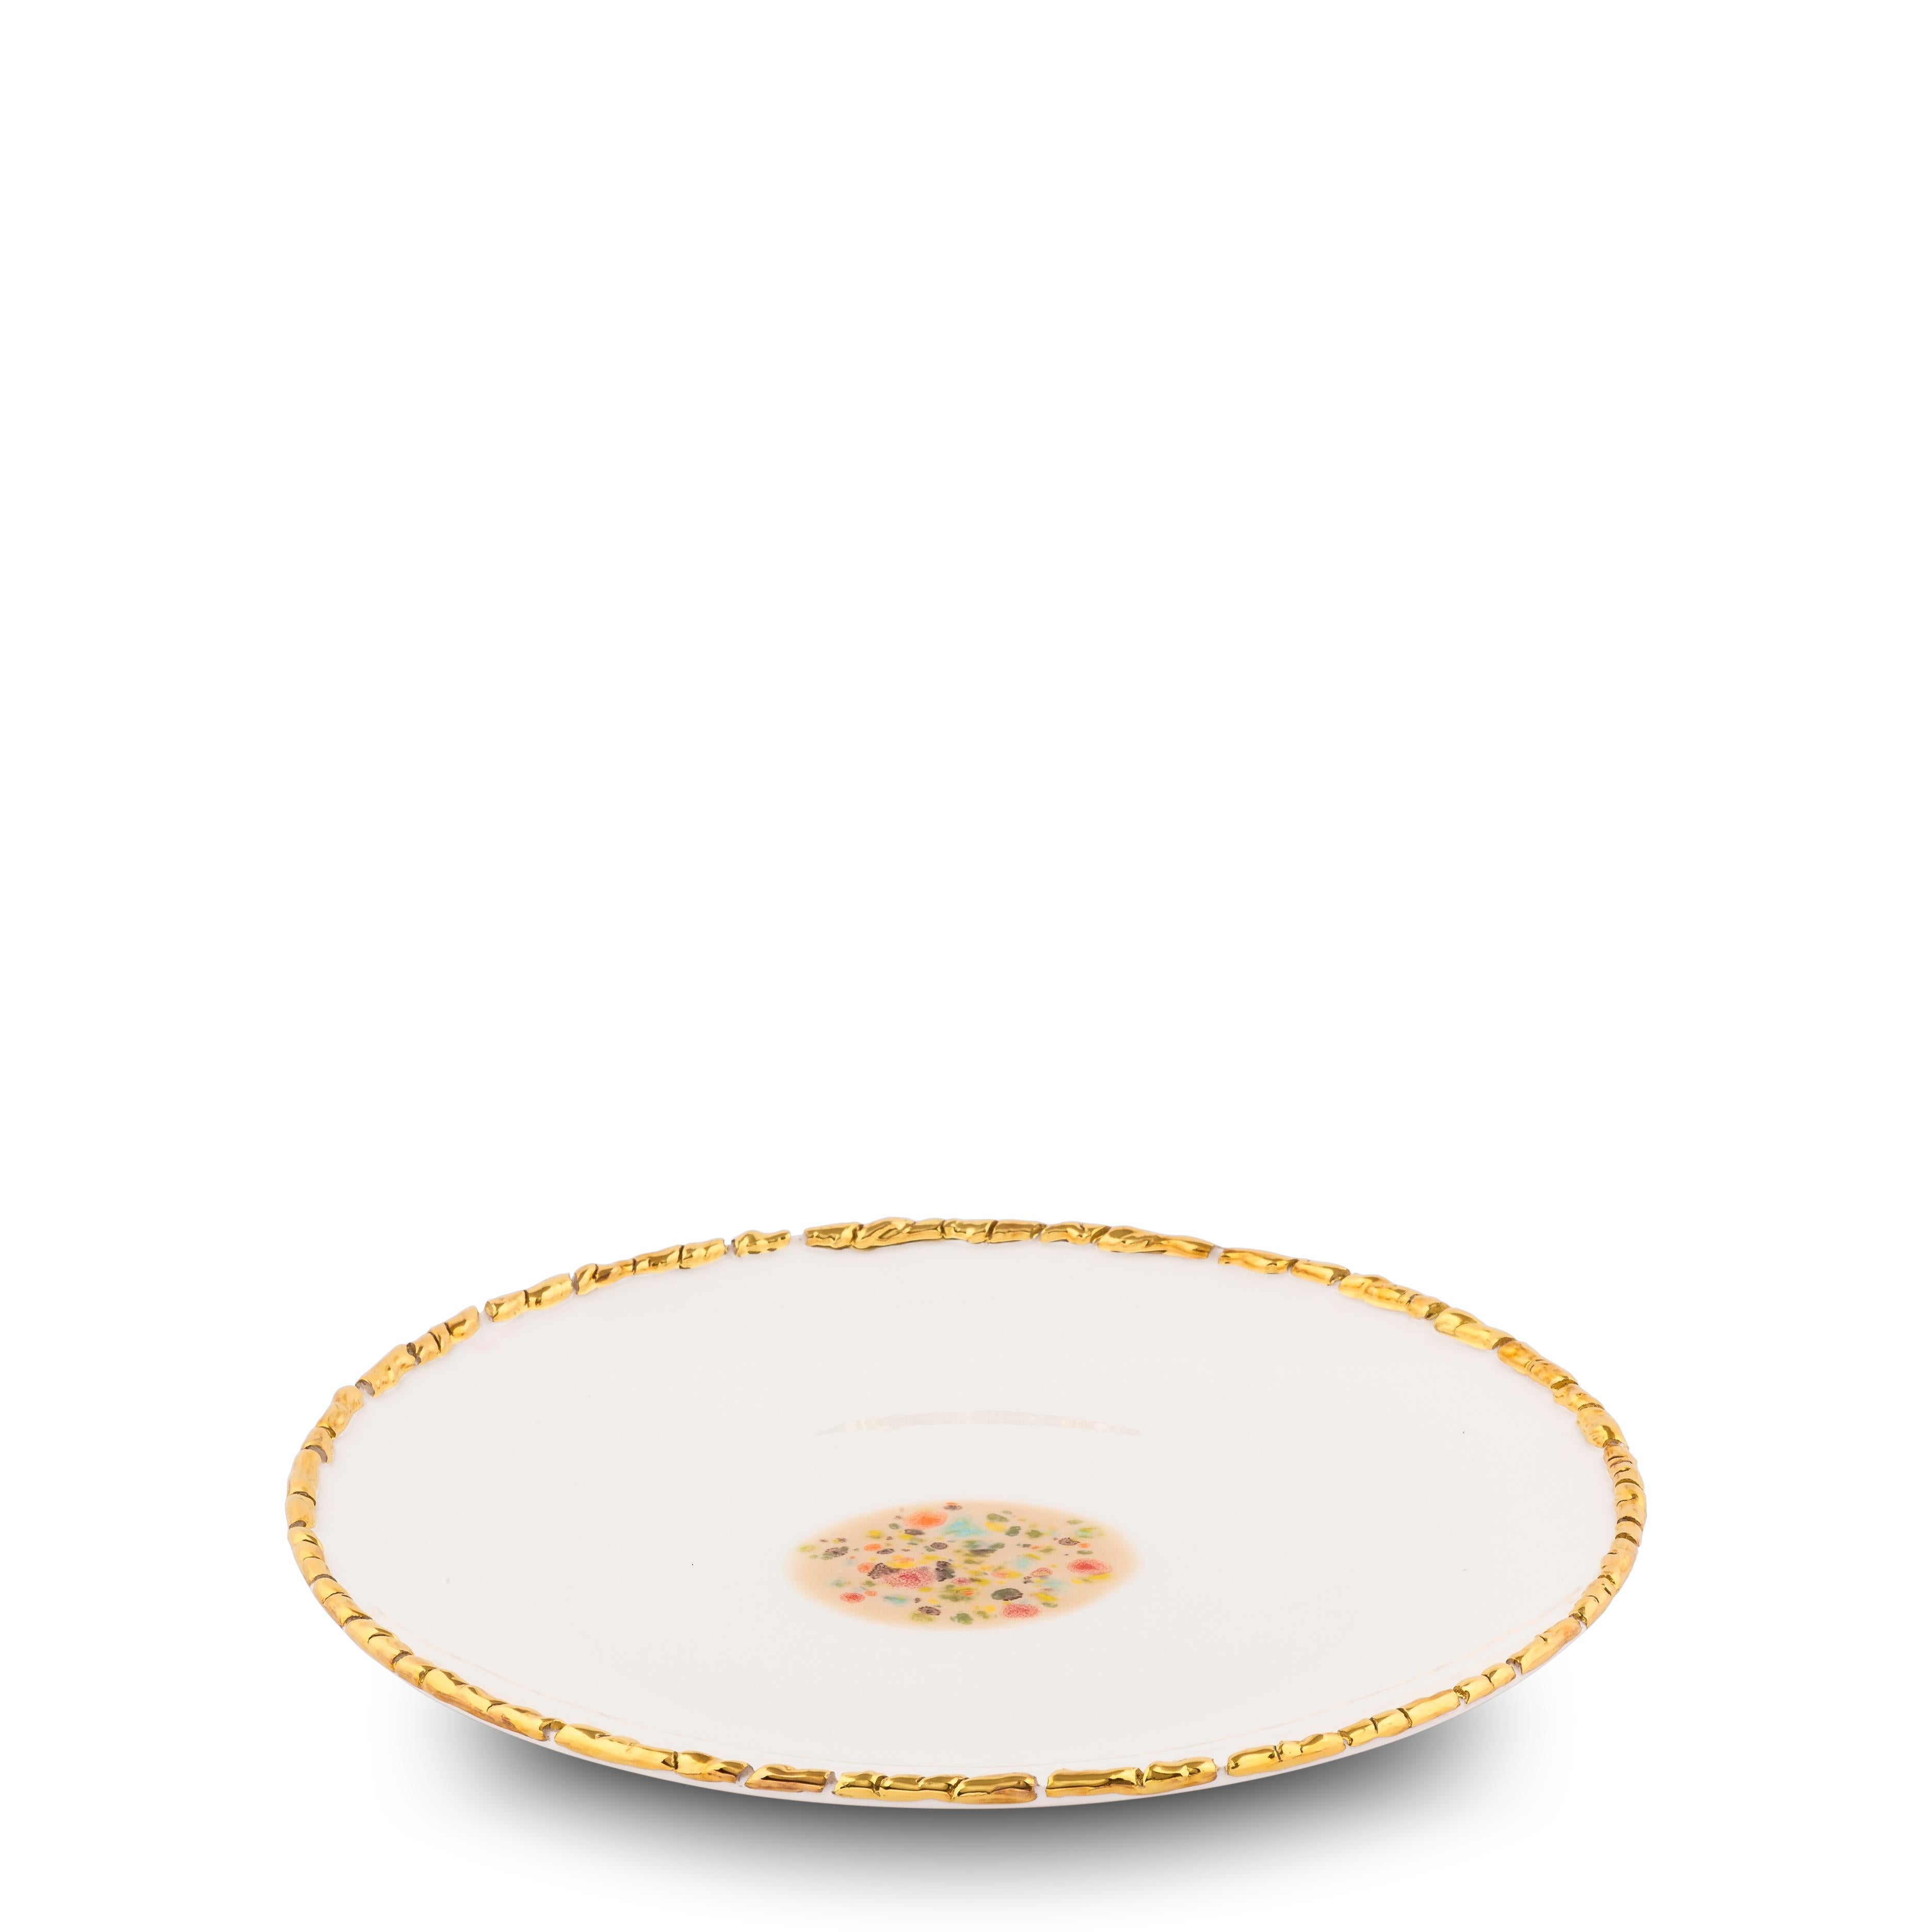 Handcrafted in Italy from the finest porcelain, theses white Craquelé edge dessert coupe plate from the Chestnut collection have an original golden craquelé rim emphasizing the brilliant white glaze and the sandy, dotted décor at the center.

Set